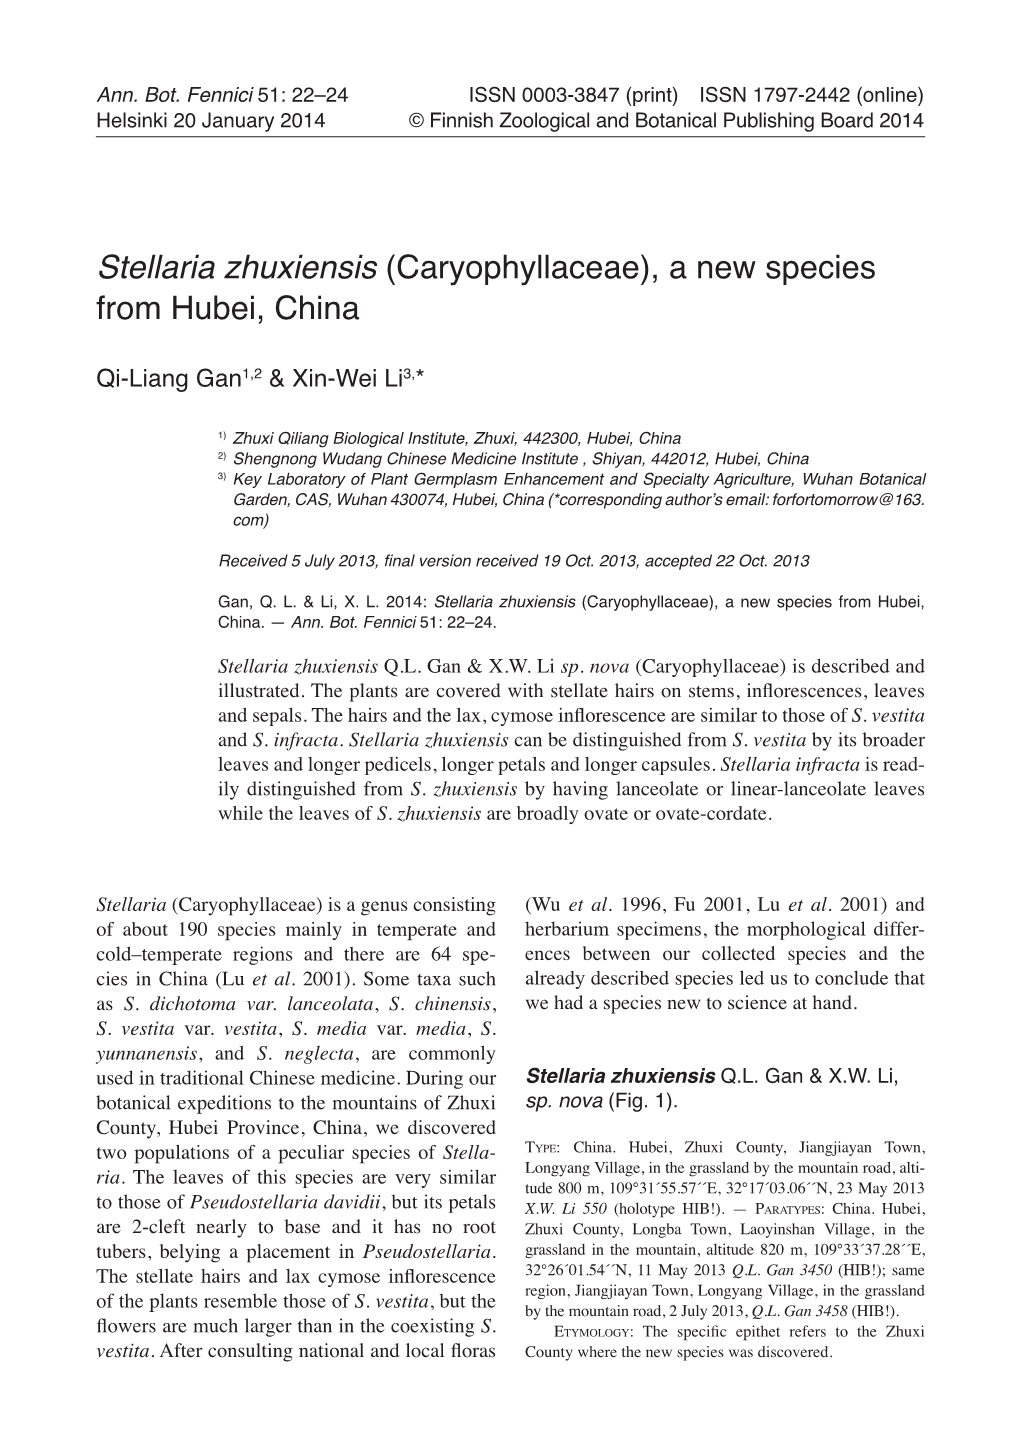 (Caryophyllaceae), a New Species from Hubei, China